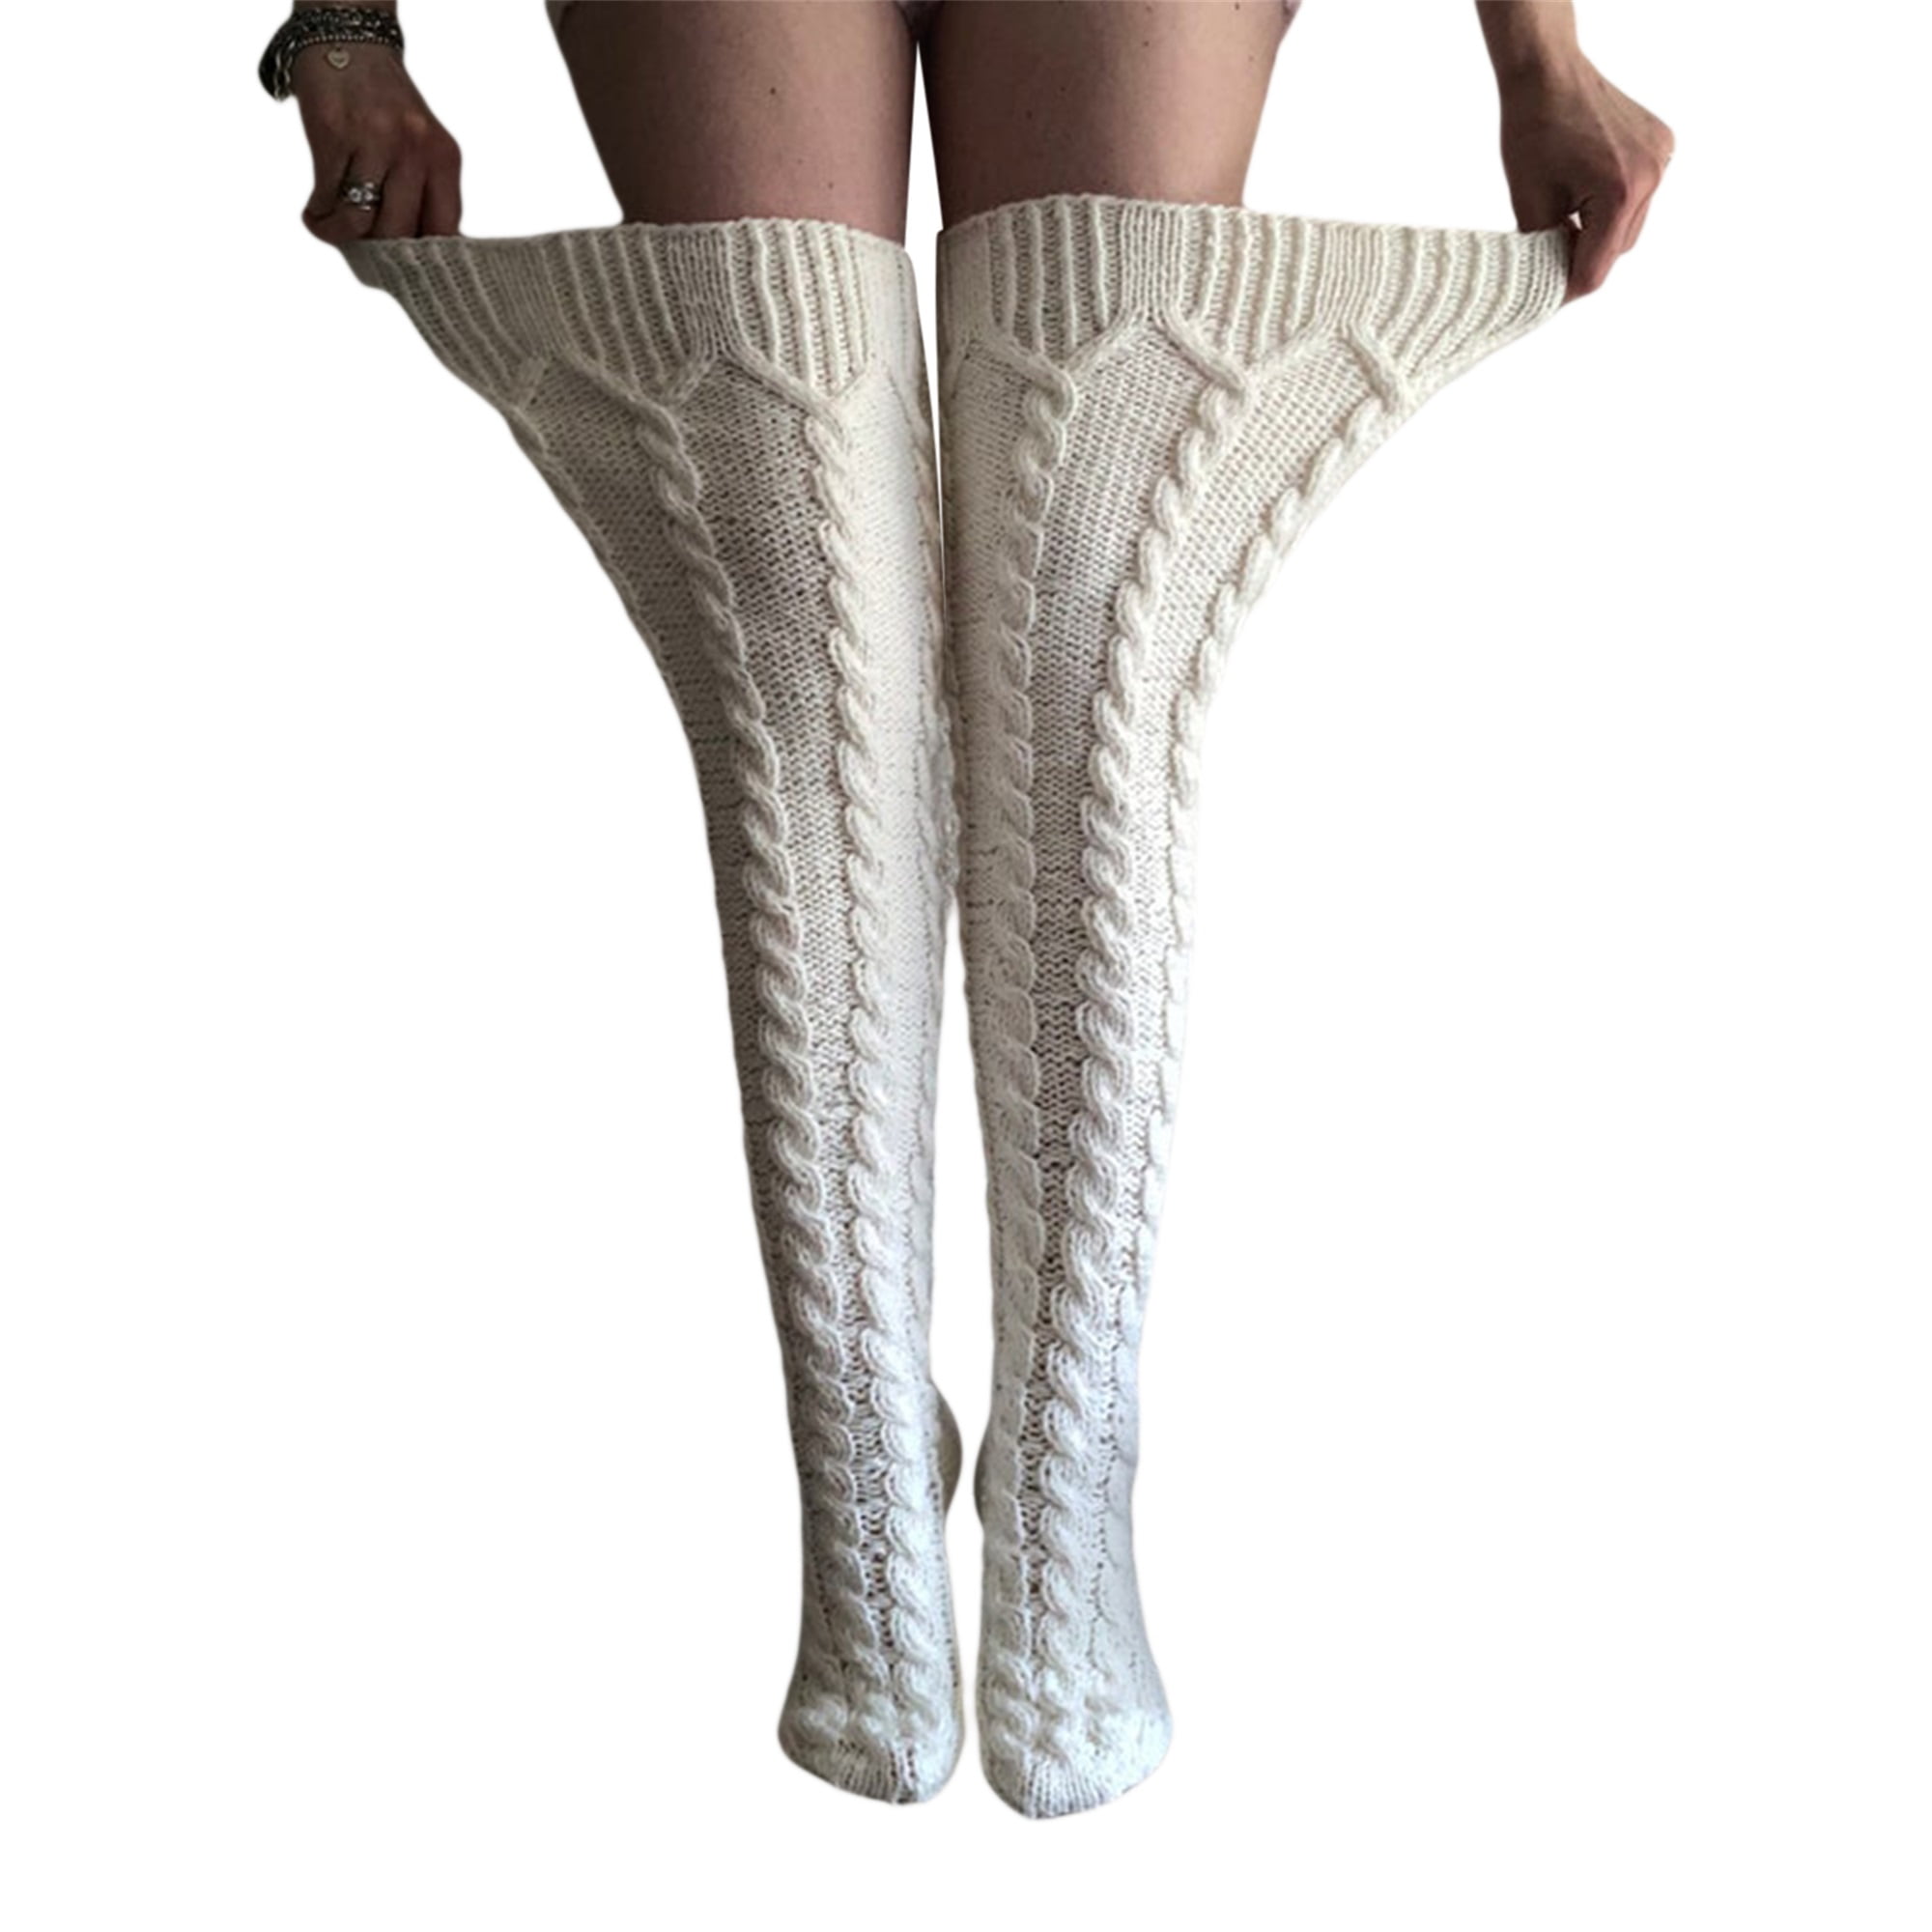 Women Cable Knitted Long Stockings Fashion Thigh High Boot Socks ...